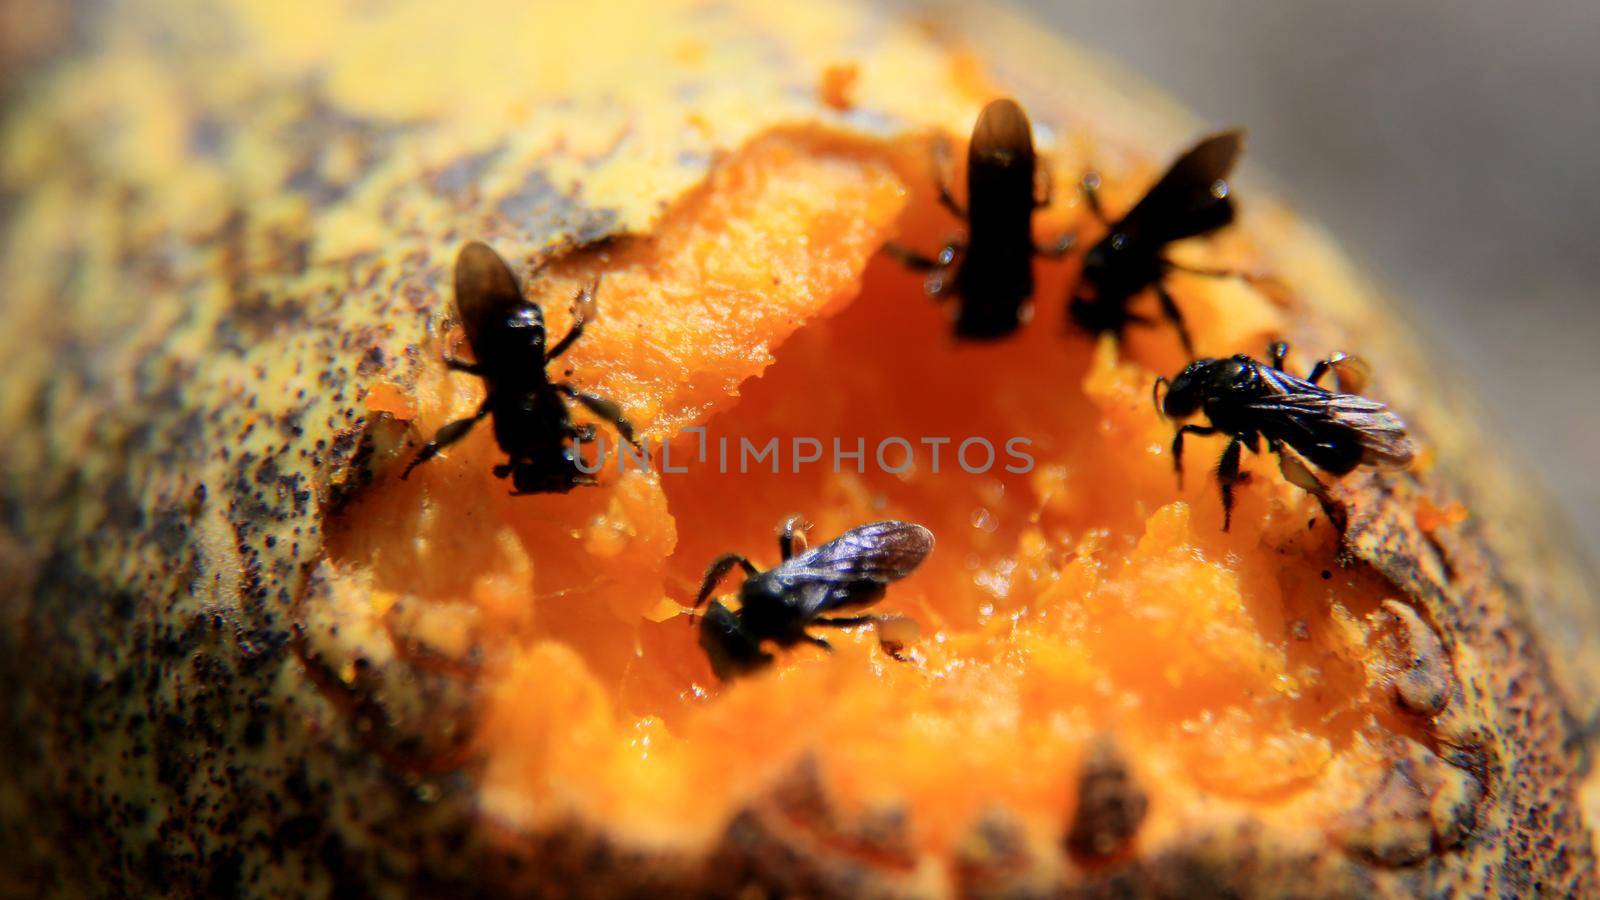 salvador, bahia / brazil - june 27, 2016: insects are seen eating mango in the city of Salvador.